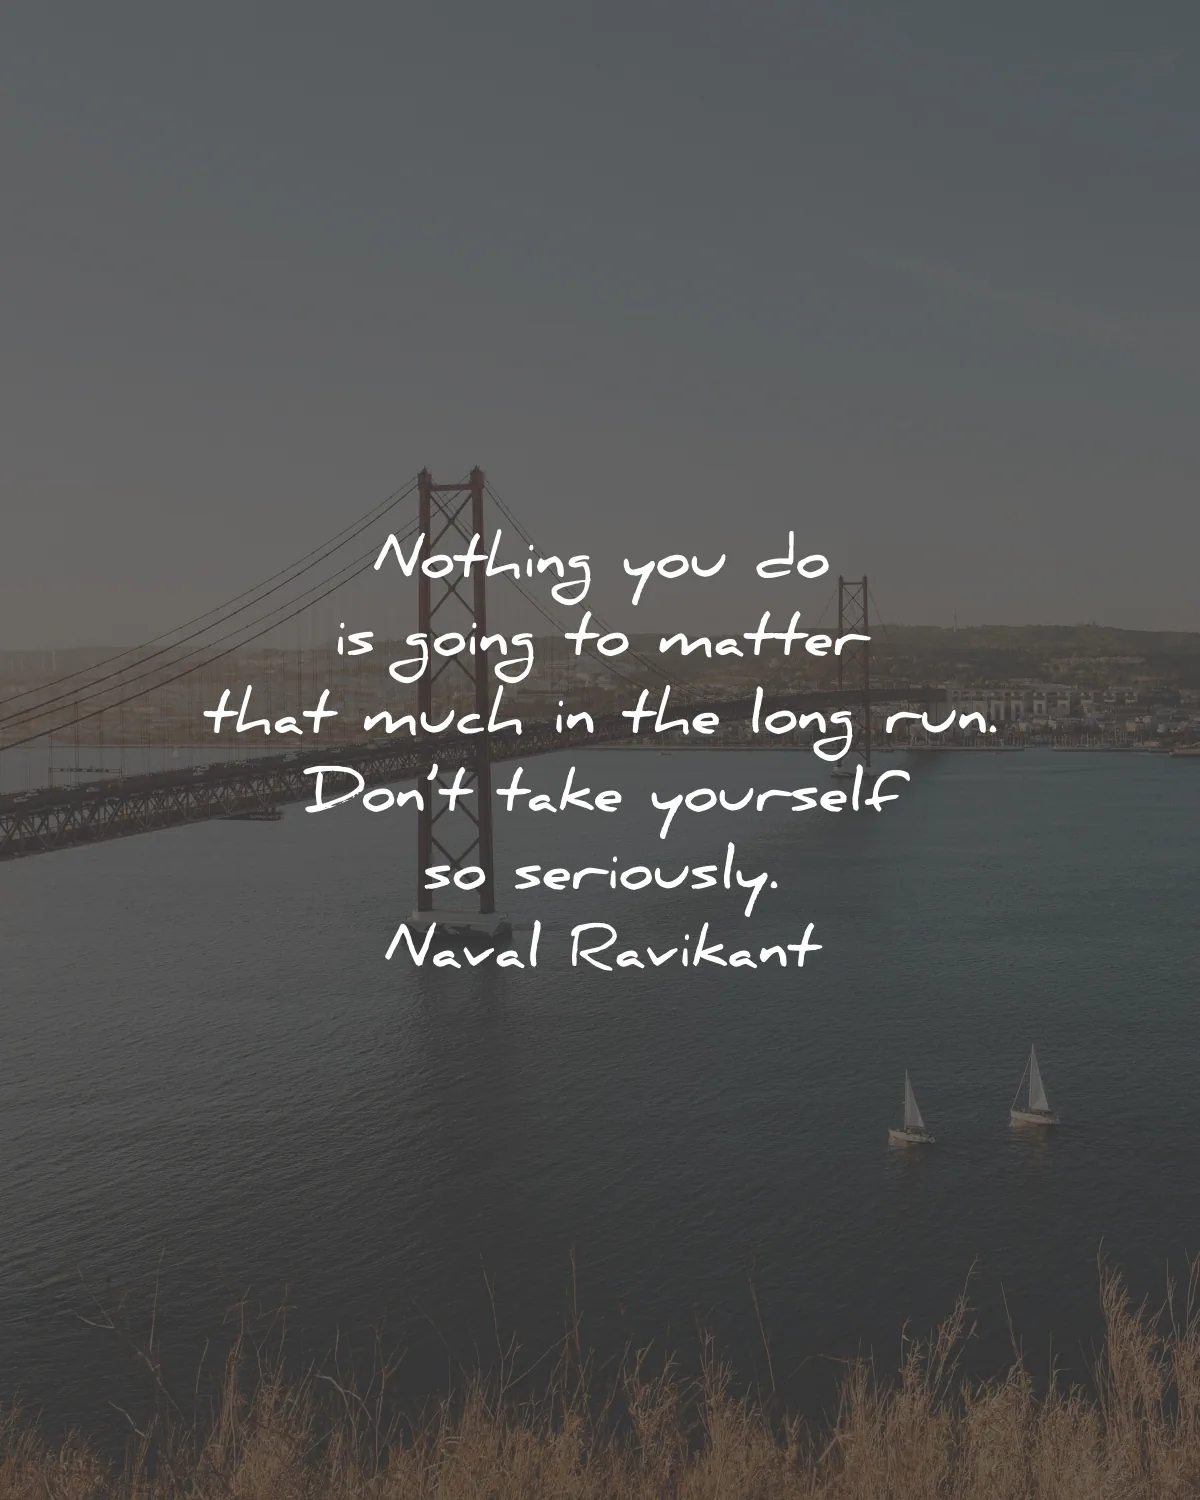 life lessons quotes nothing going matter long run seriously naval ravikant wisdom